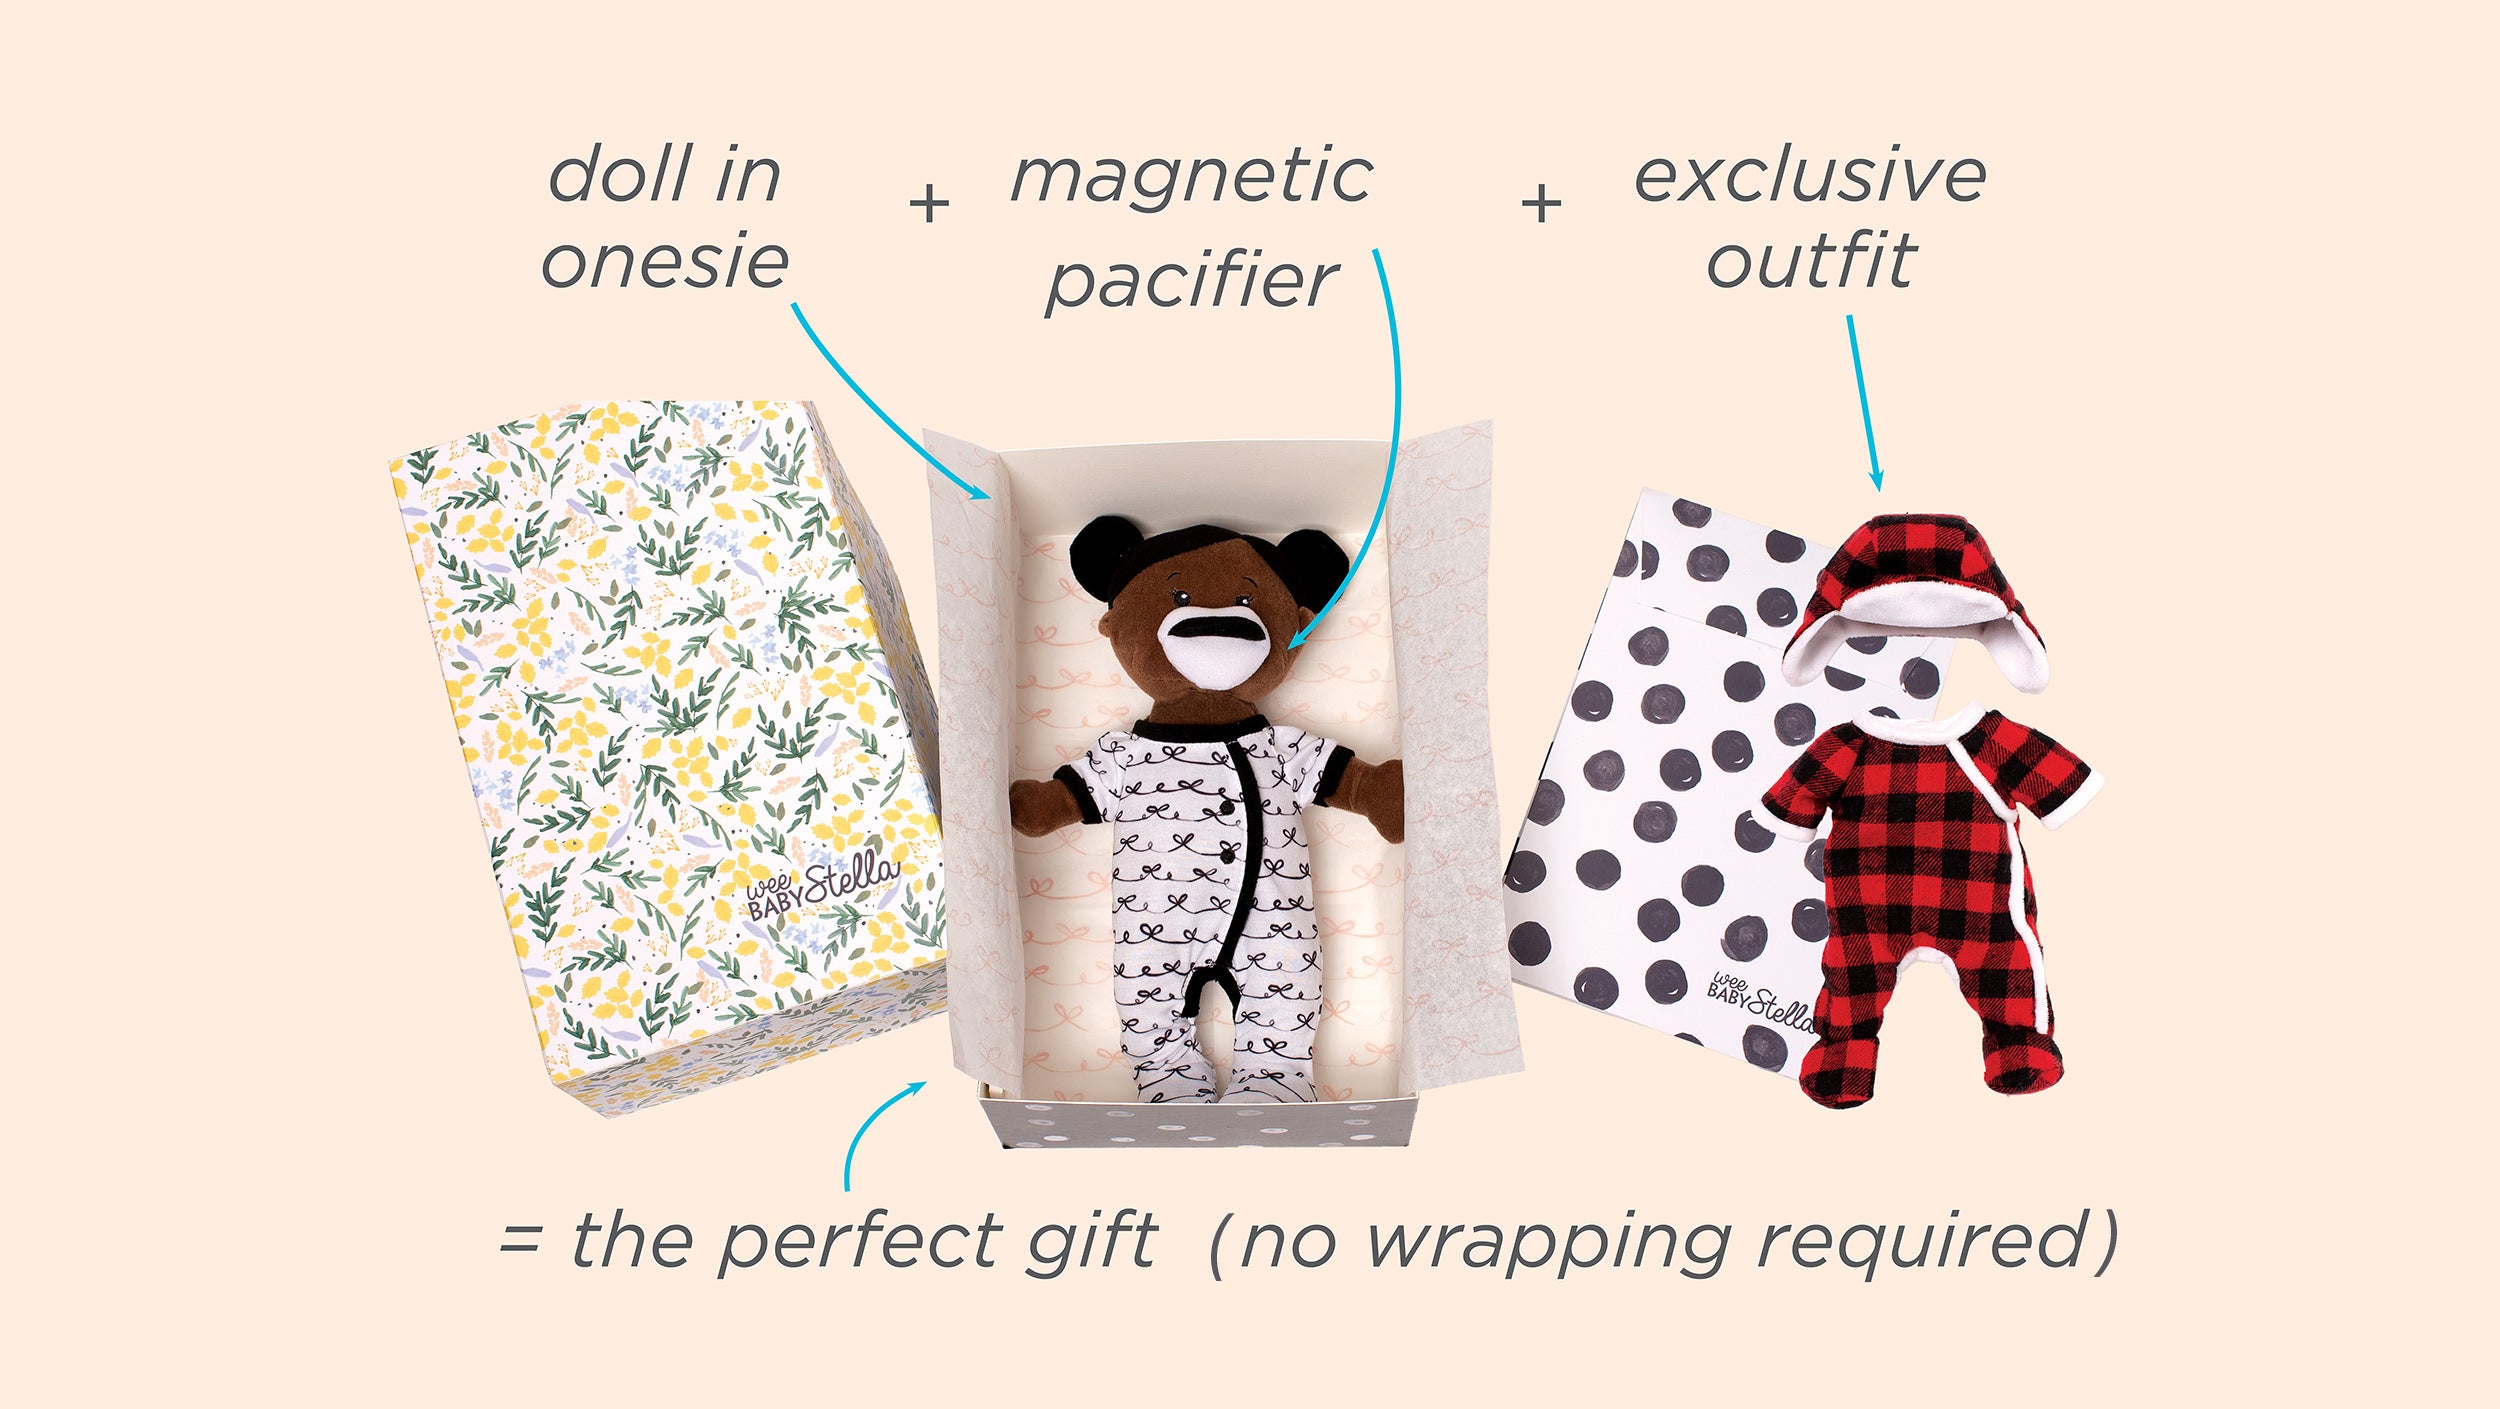 Depiction of what you get with your Create Your Own Wee Baby Stella Doll. It includes a doll in a removable onesie and magnetic pacifier, that comes in a gift box and an outfit. The perfect gift; no wrapping required. 